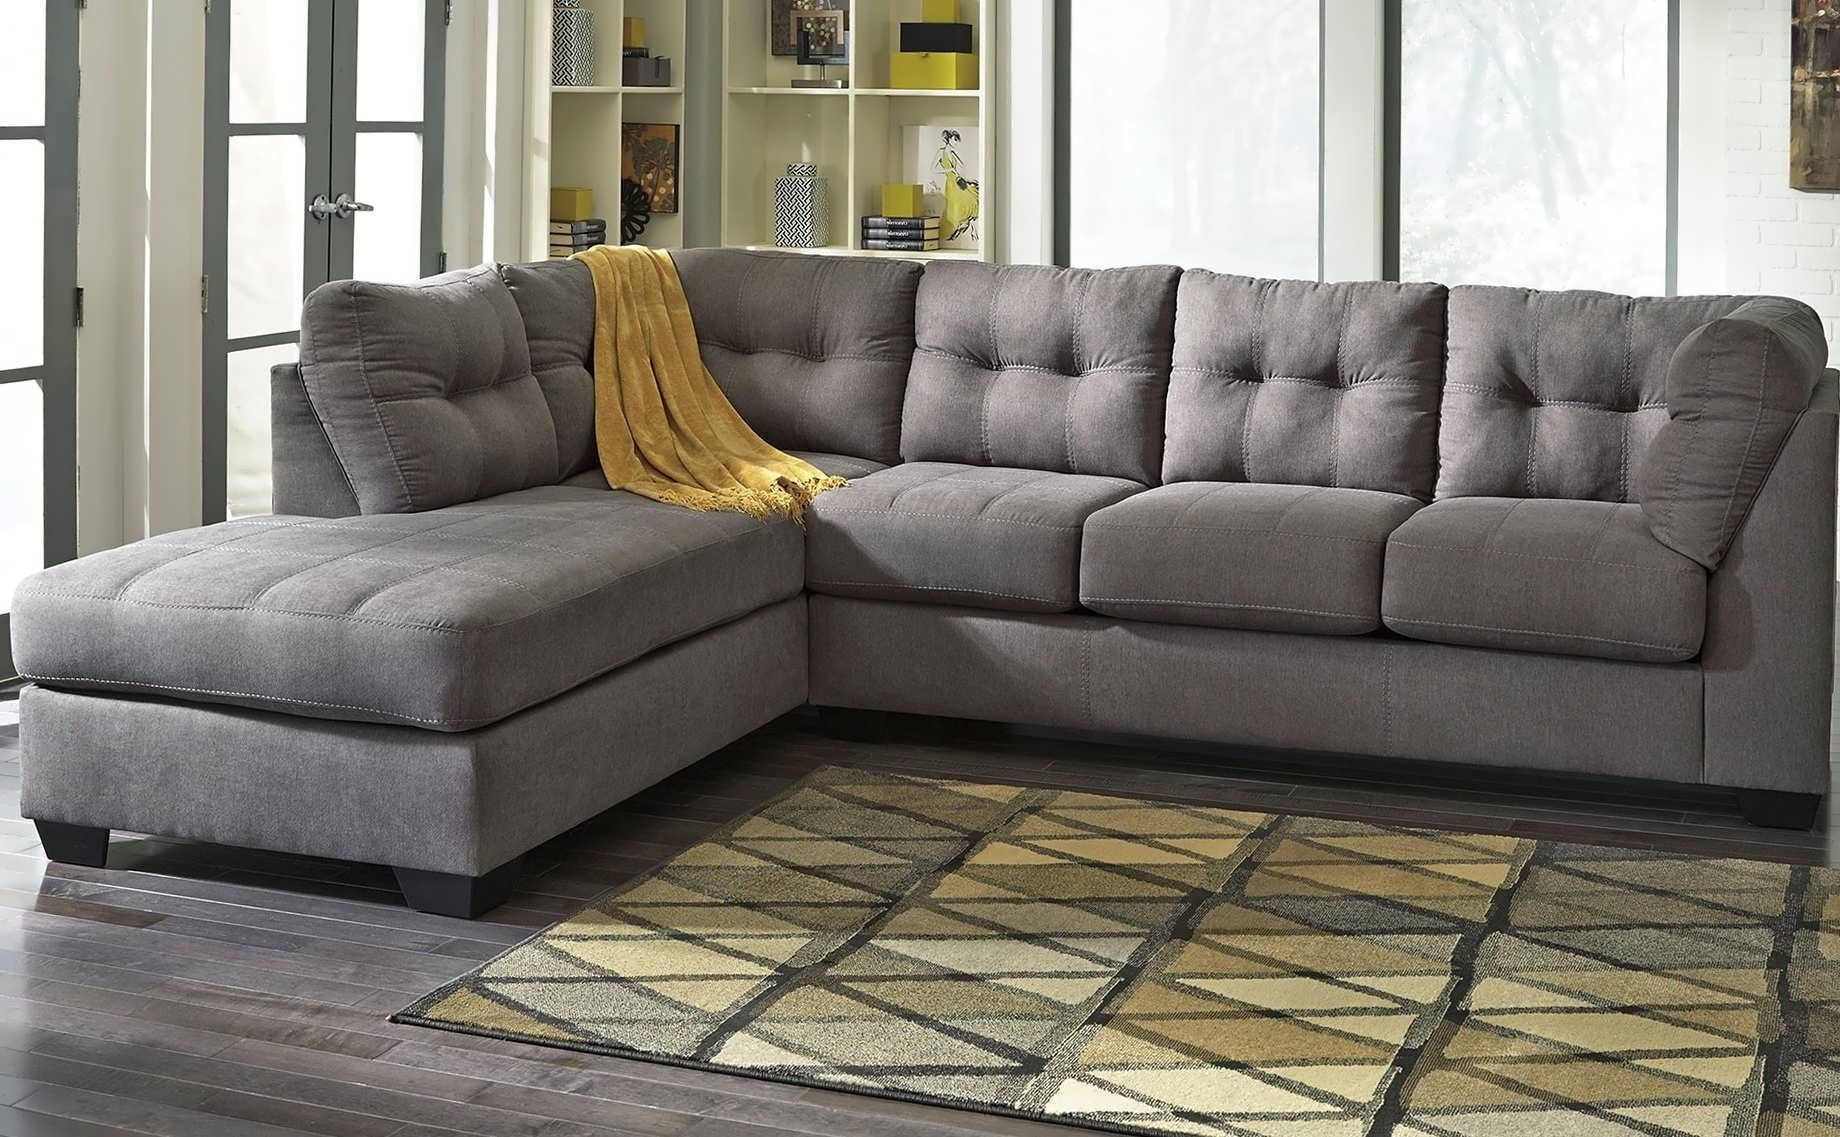 15 Inspirations Grey Couches with Chaise